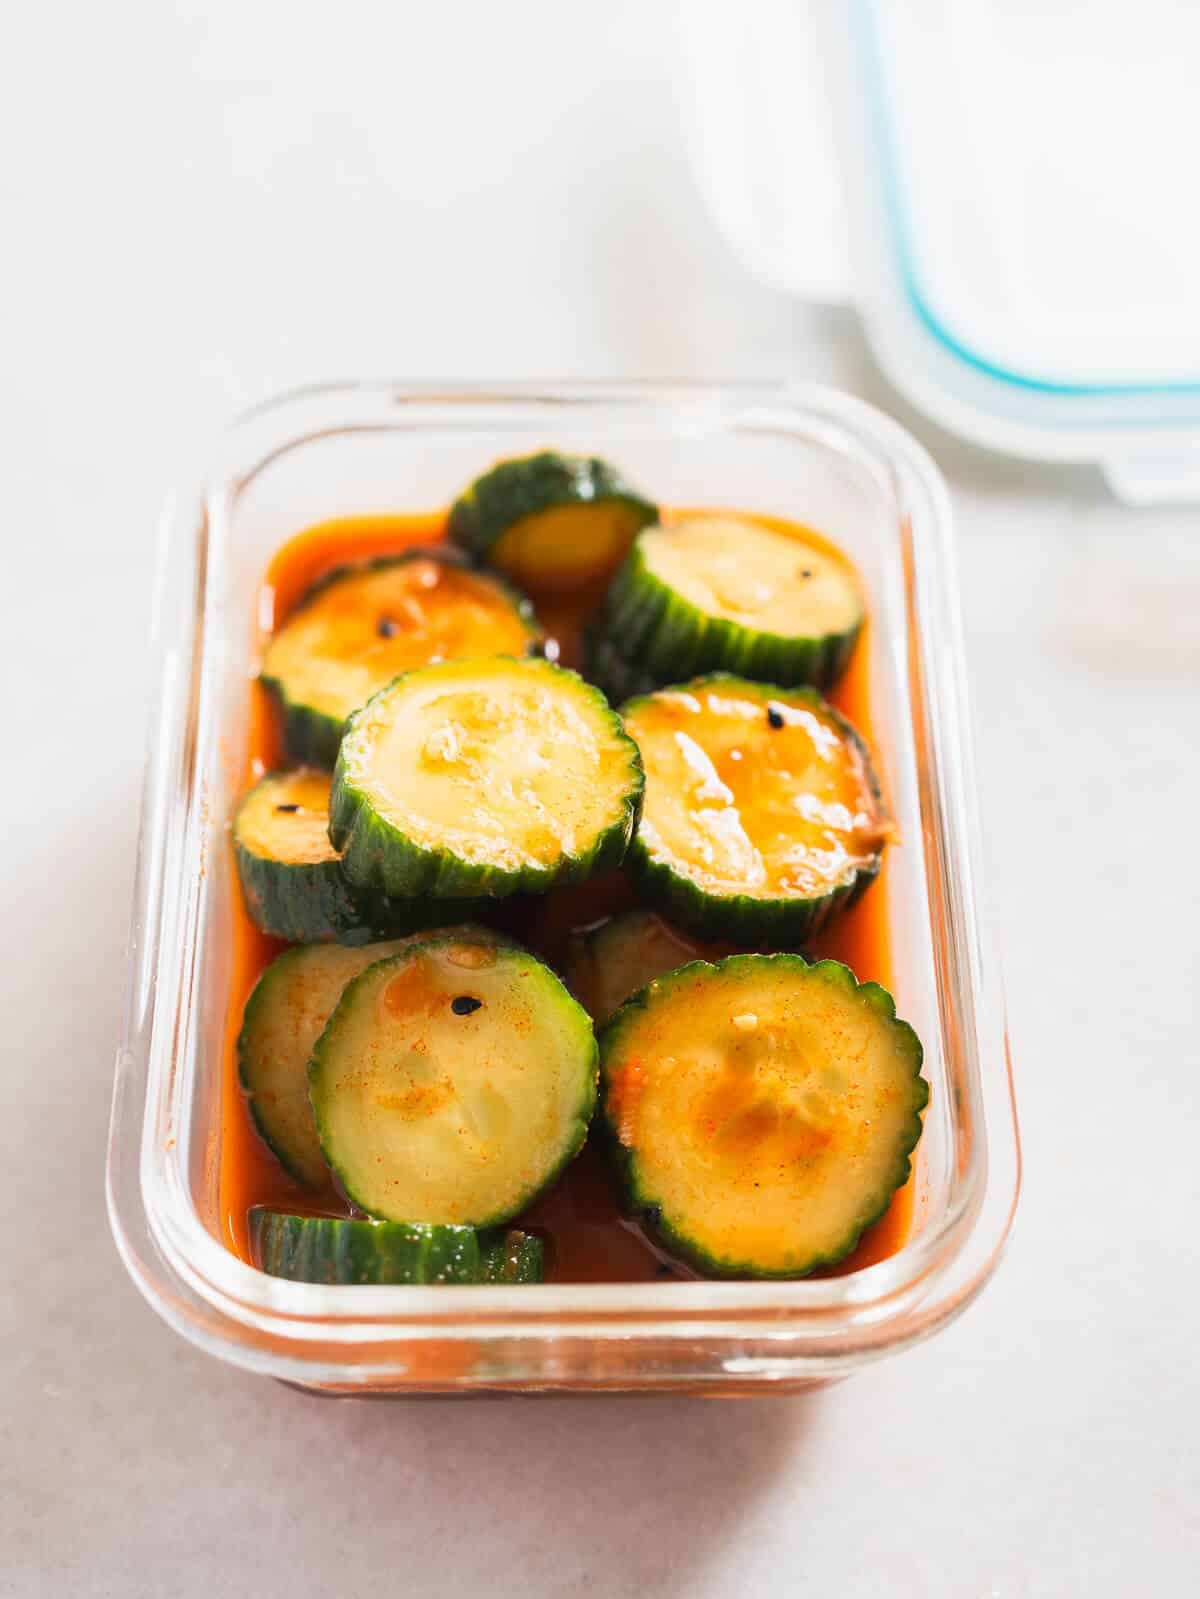 stored Korean spicy cucumber salad in a glass airtight container.